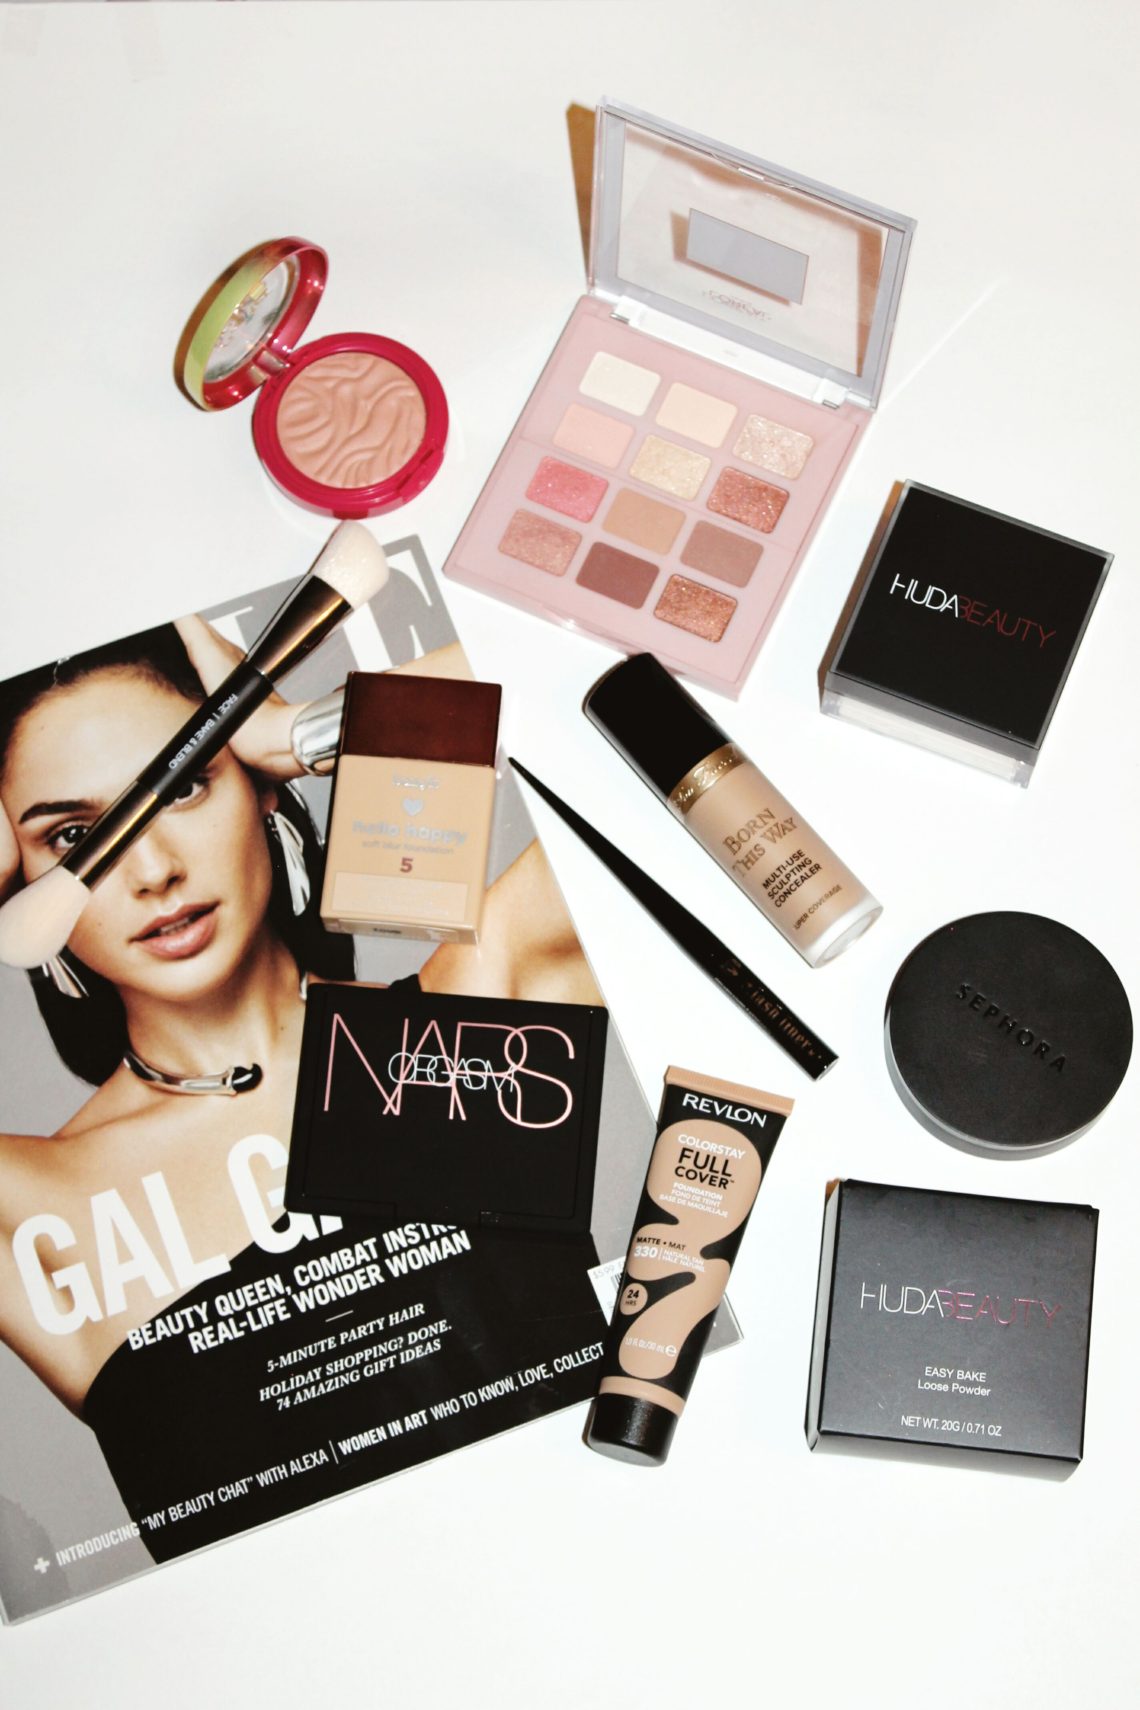 alt="what's new in my makeup collection"